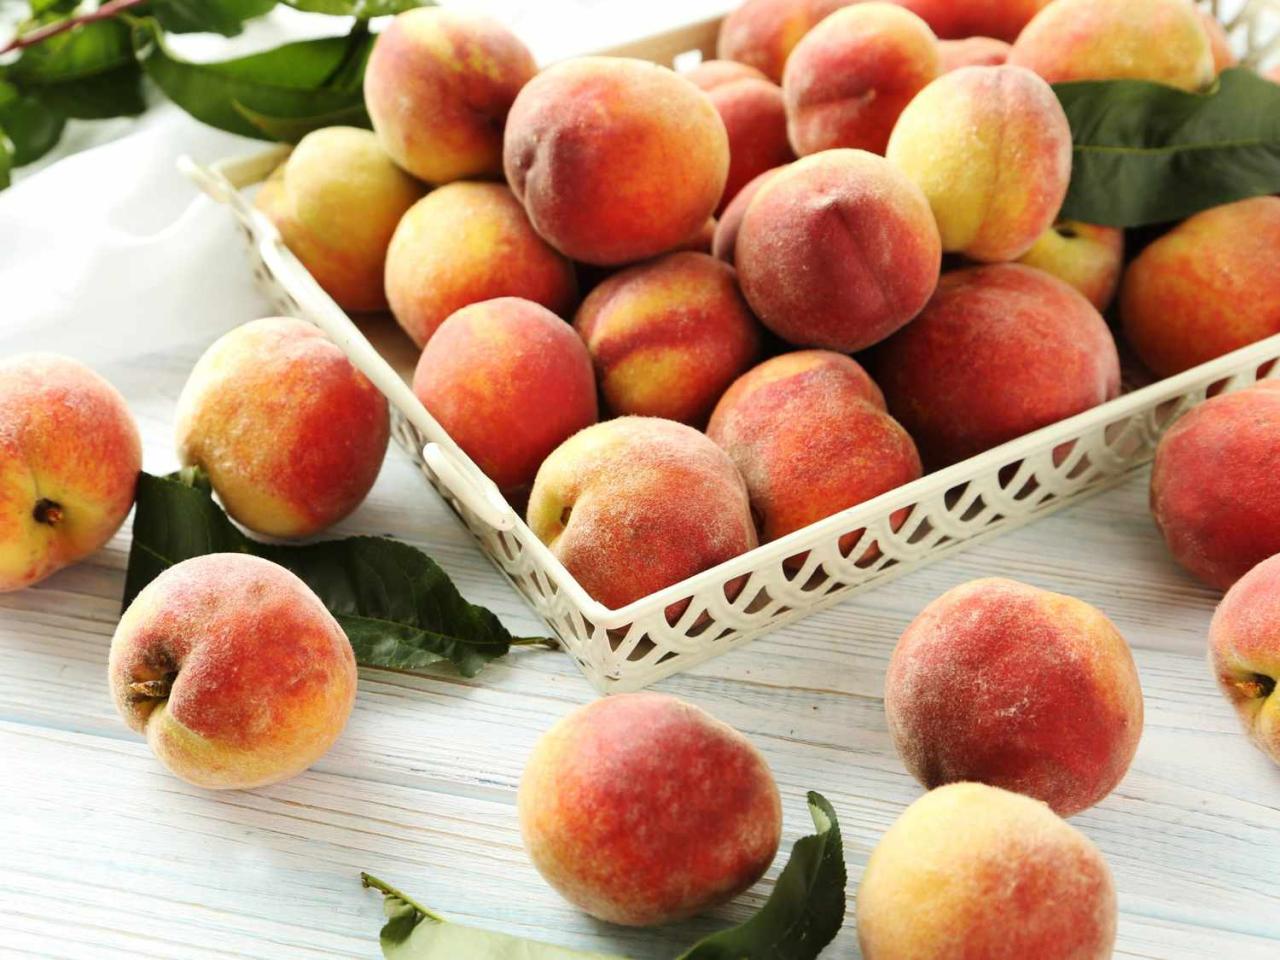 How to Store Peaches So They Don't Bruise